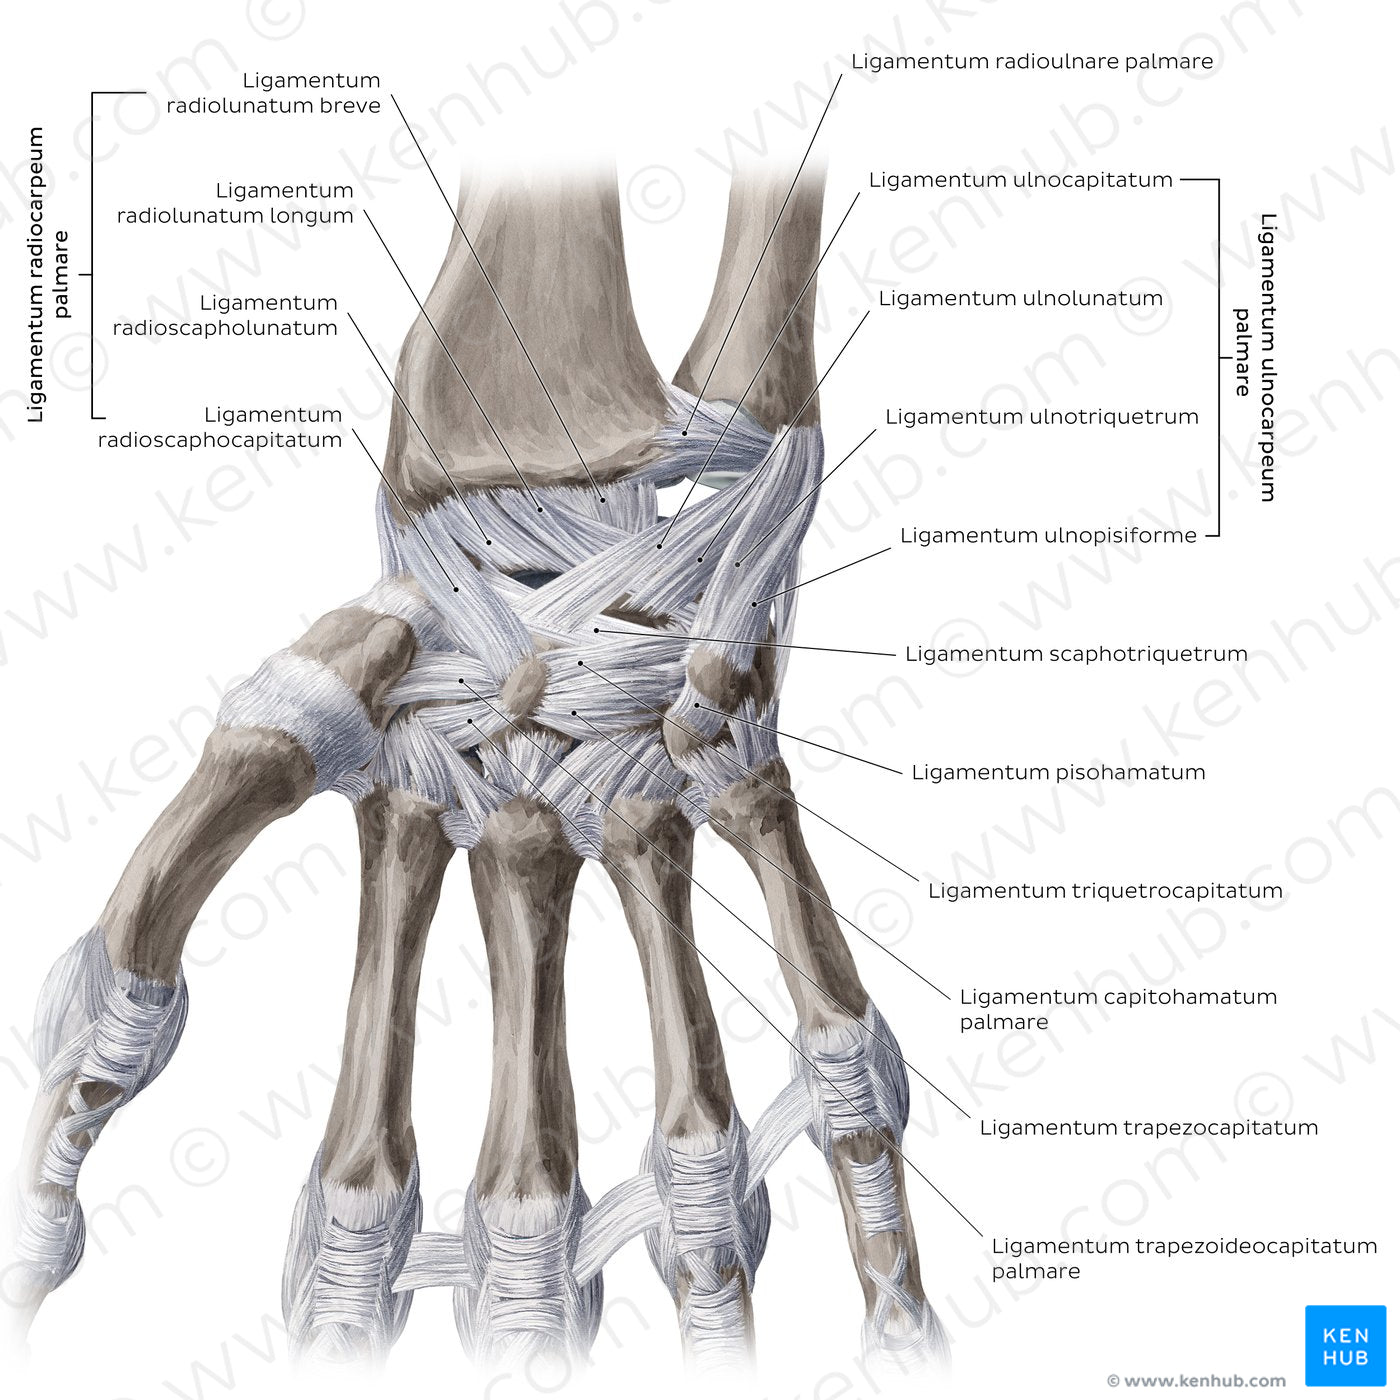 Ligaments of the wrist and hand: Palmar view (Latin)